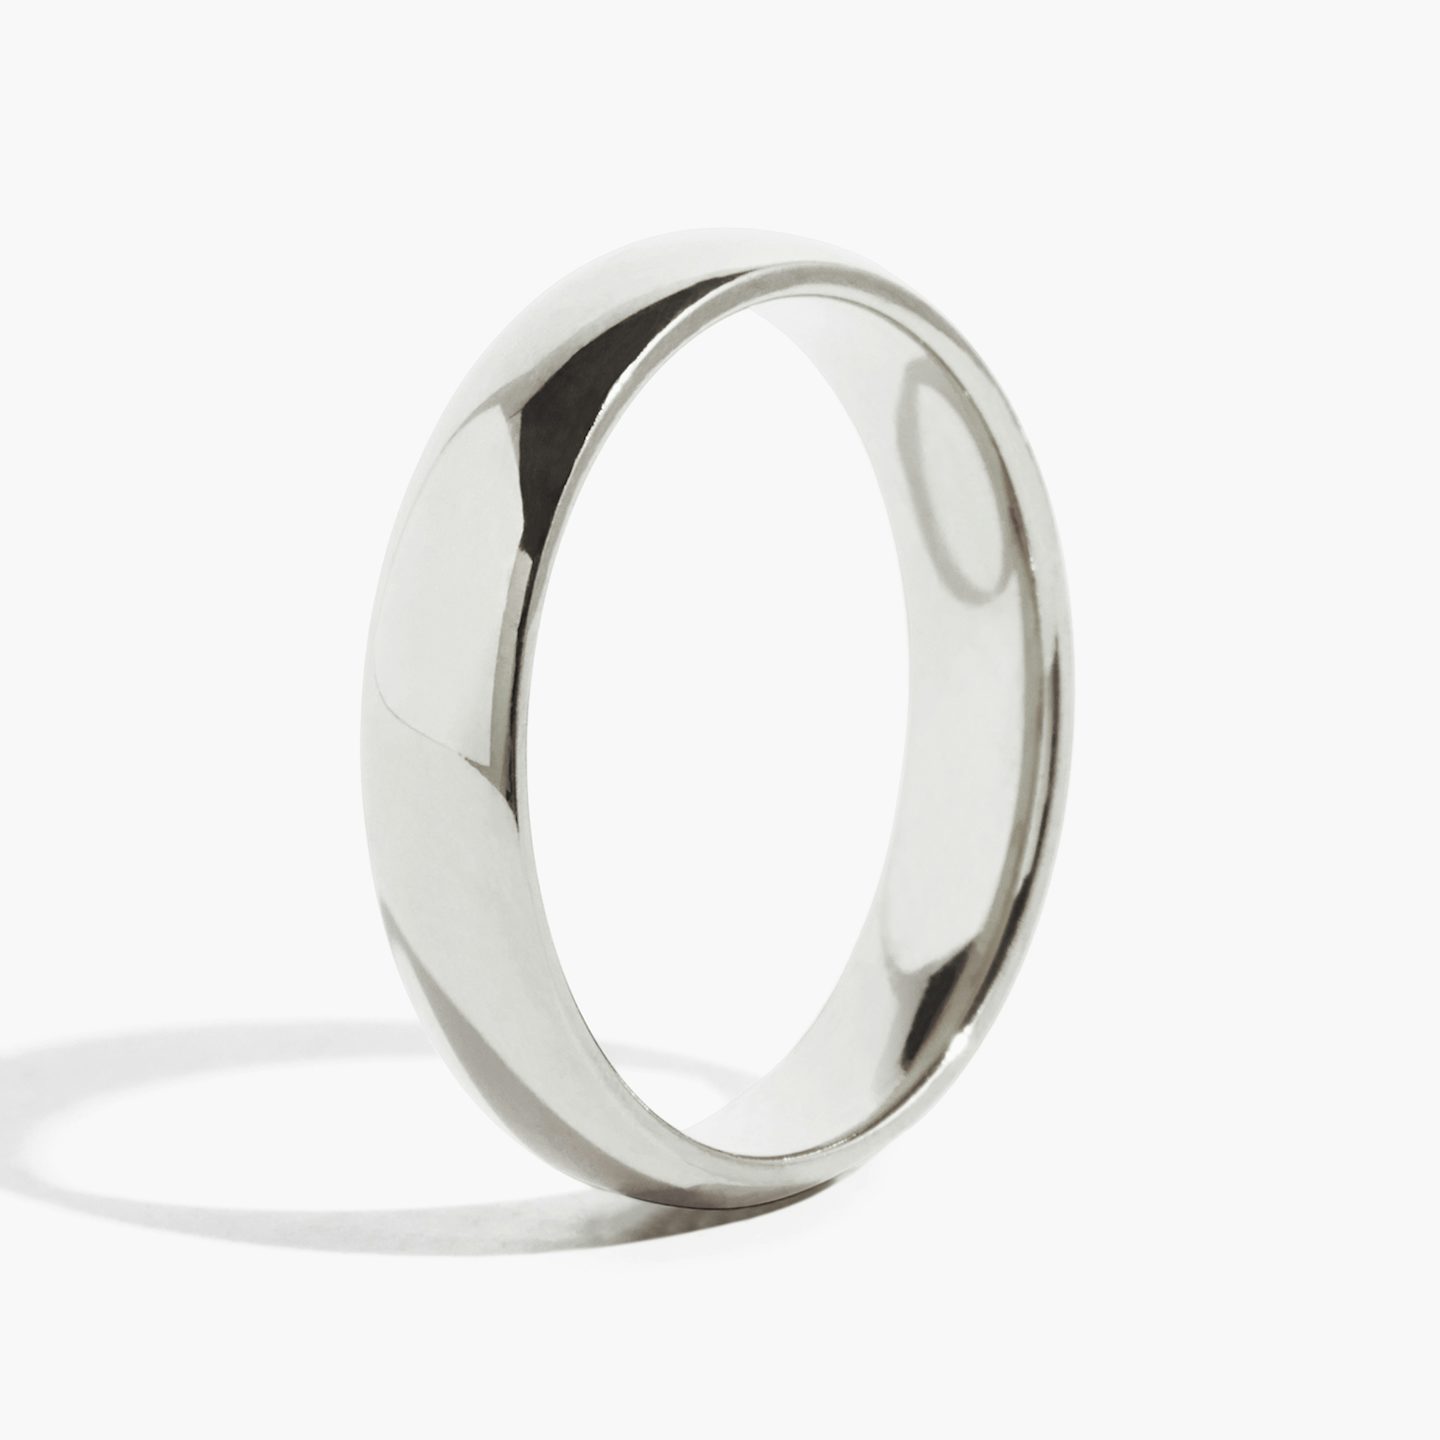 The Round | Platinum | Band width: Large - 4.5mm